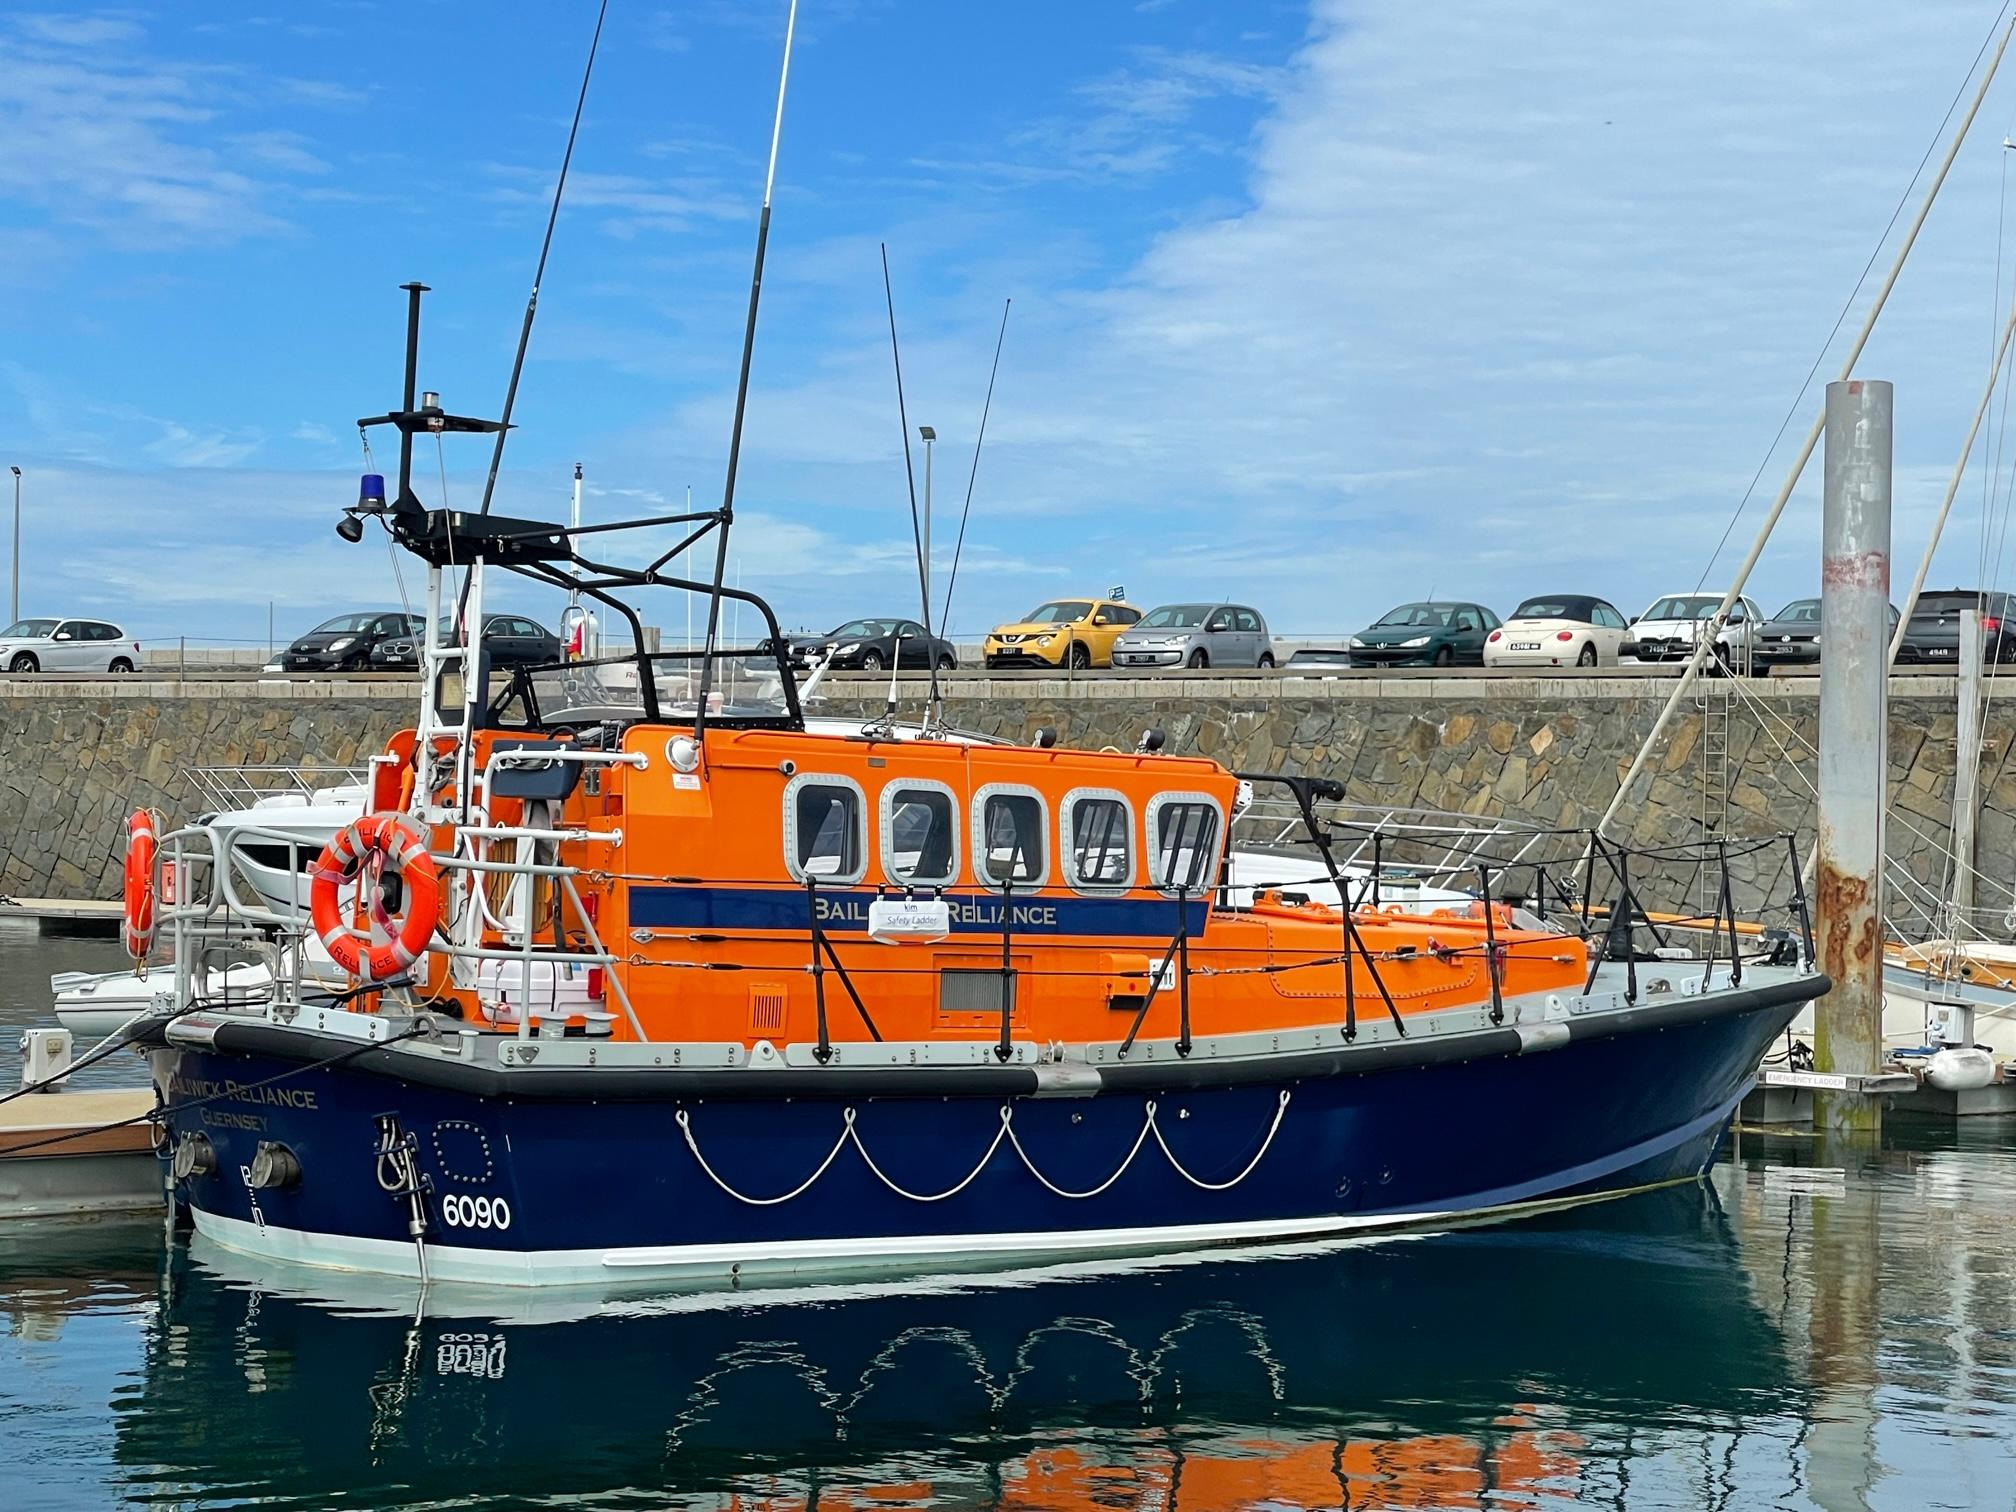 1990 Souter Mersey Class Lifeboat